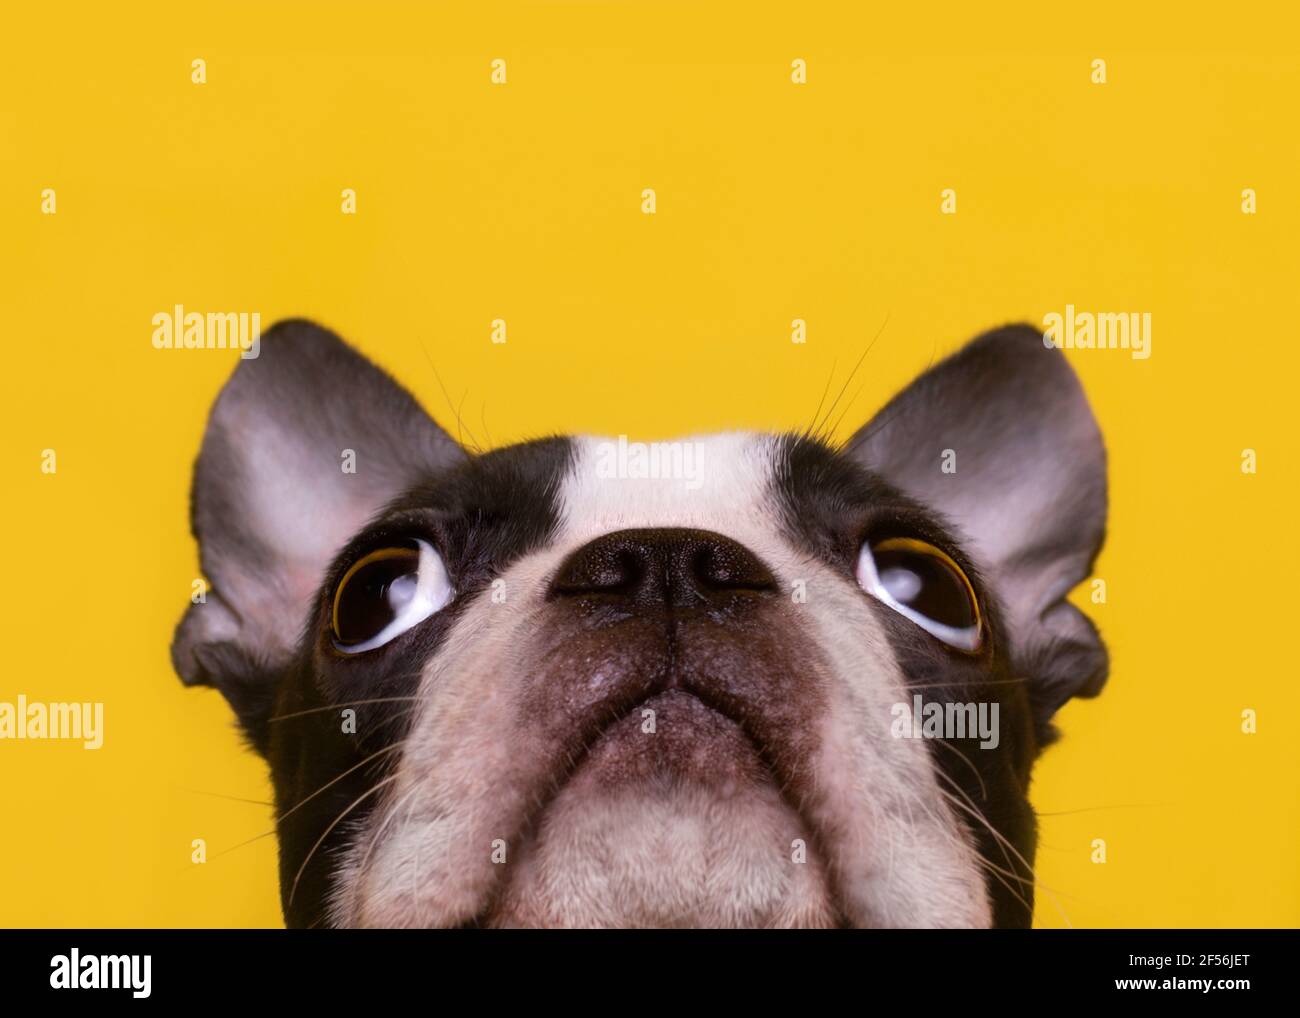 Head of Boston Terrier puppy looking up Stock Photo